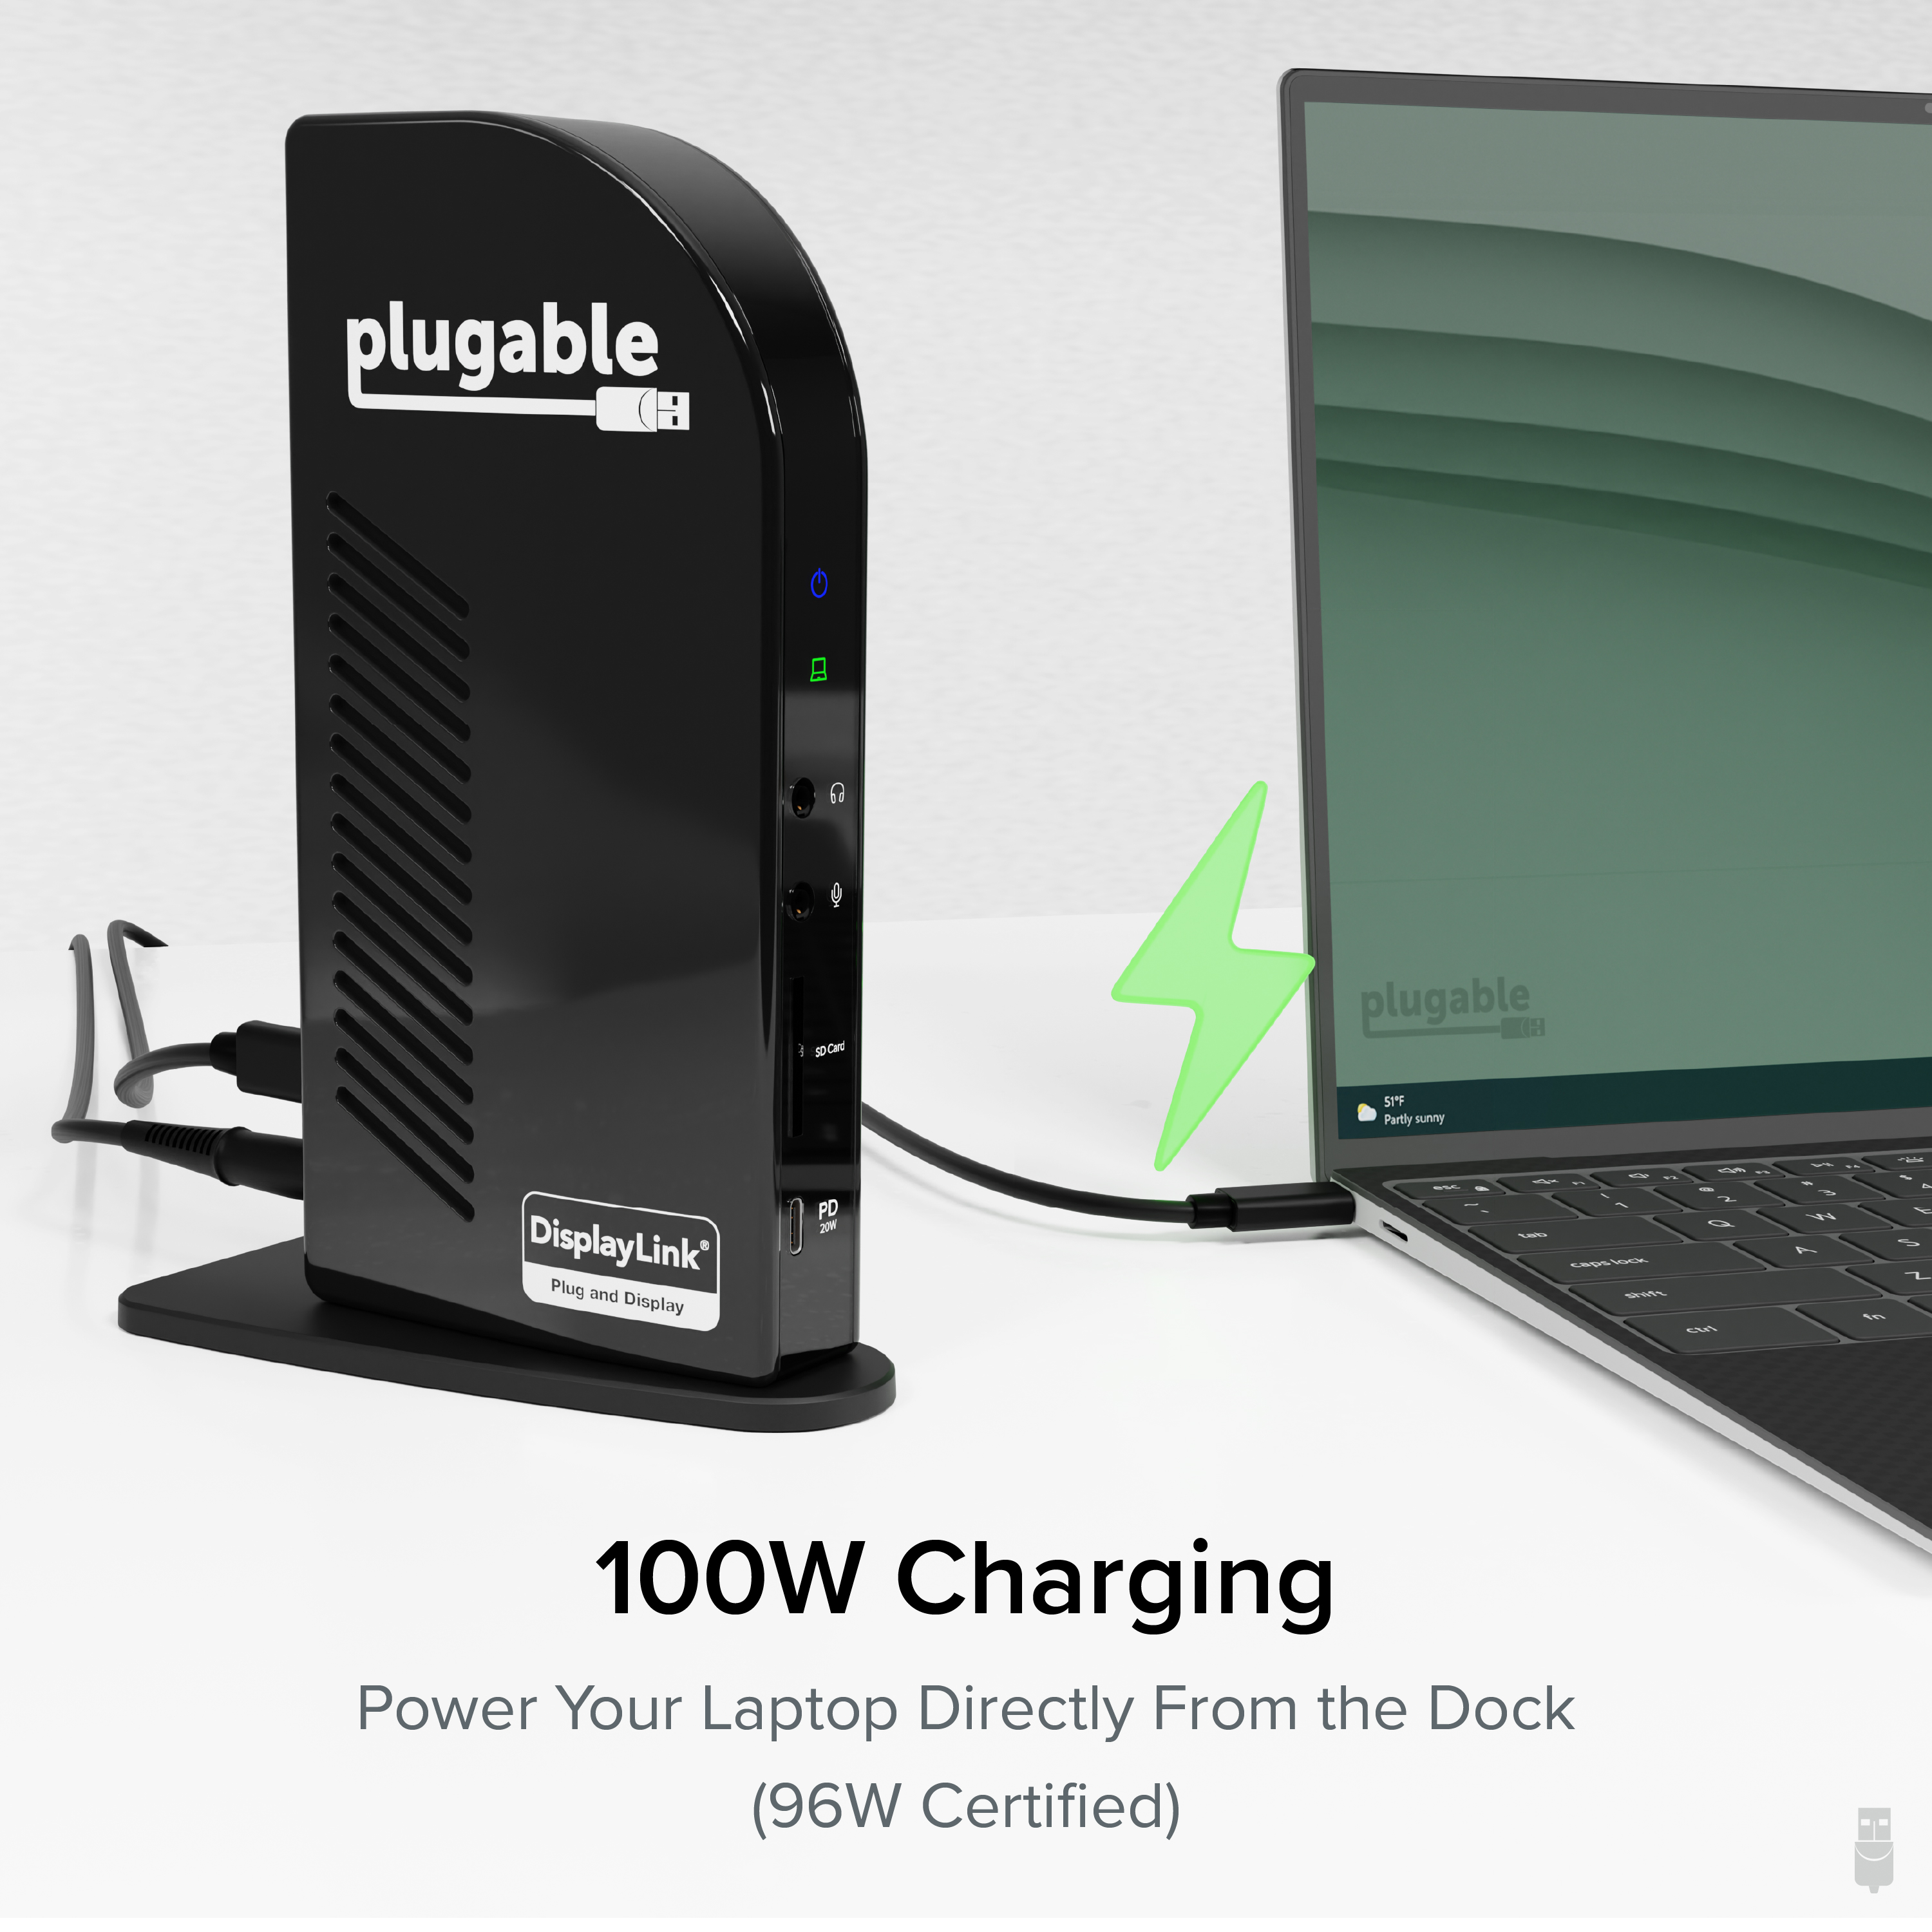 Plugable 14-in-1 USB C Docking Station with 4x HDMI, Quad Dock with 100W Charging, 4x HDMI Displays, Compatible with Windows, Thunderbolt, USB-C (4x USB, 1x USB-C, Ethernet, SD Card, Audio) - image 4 of 8